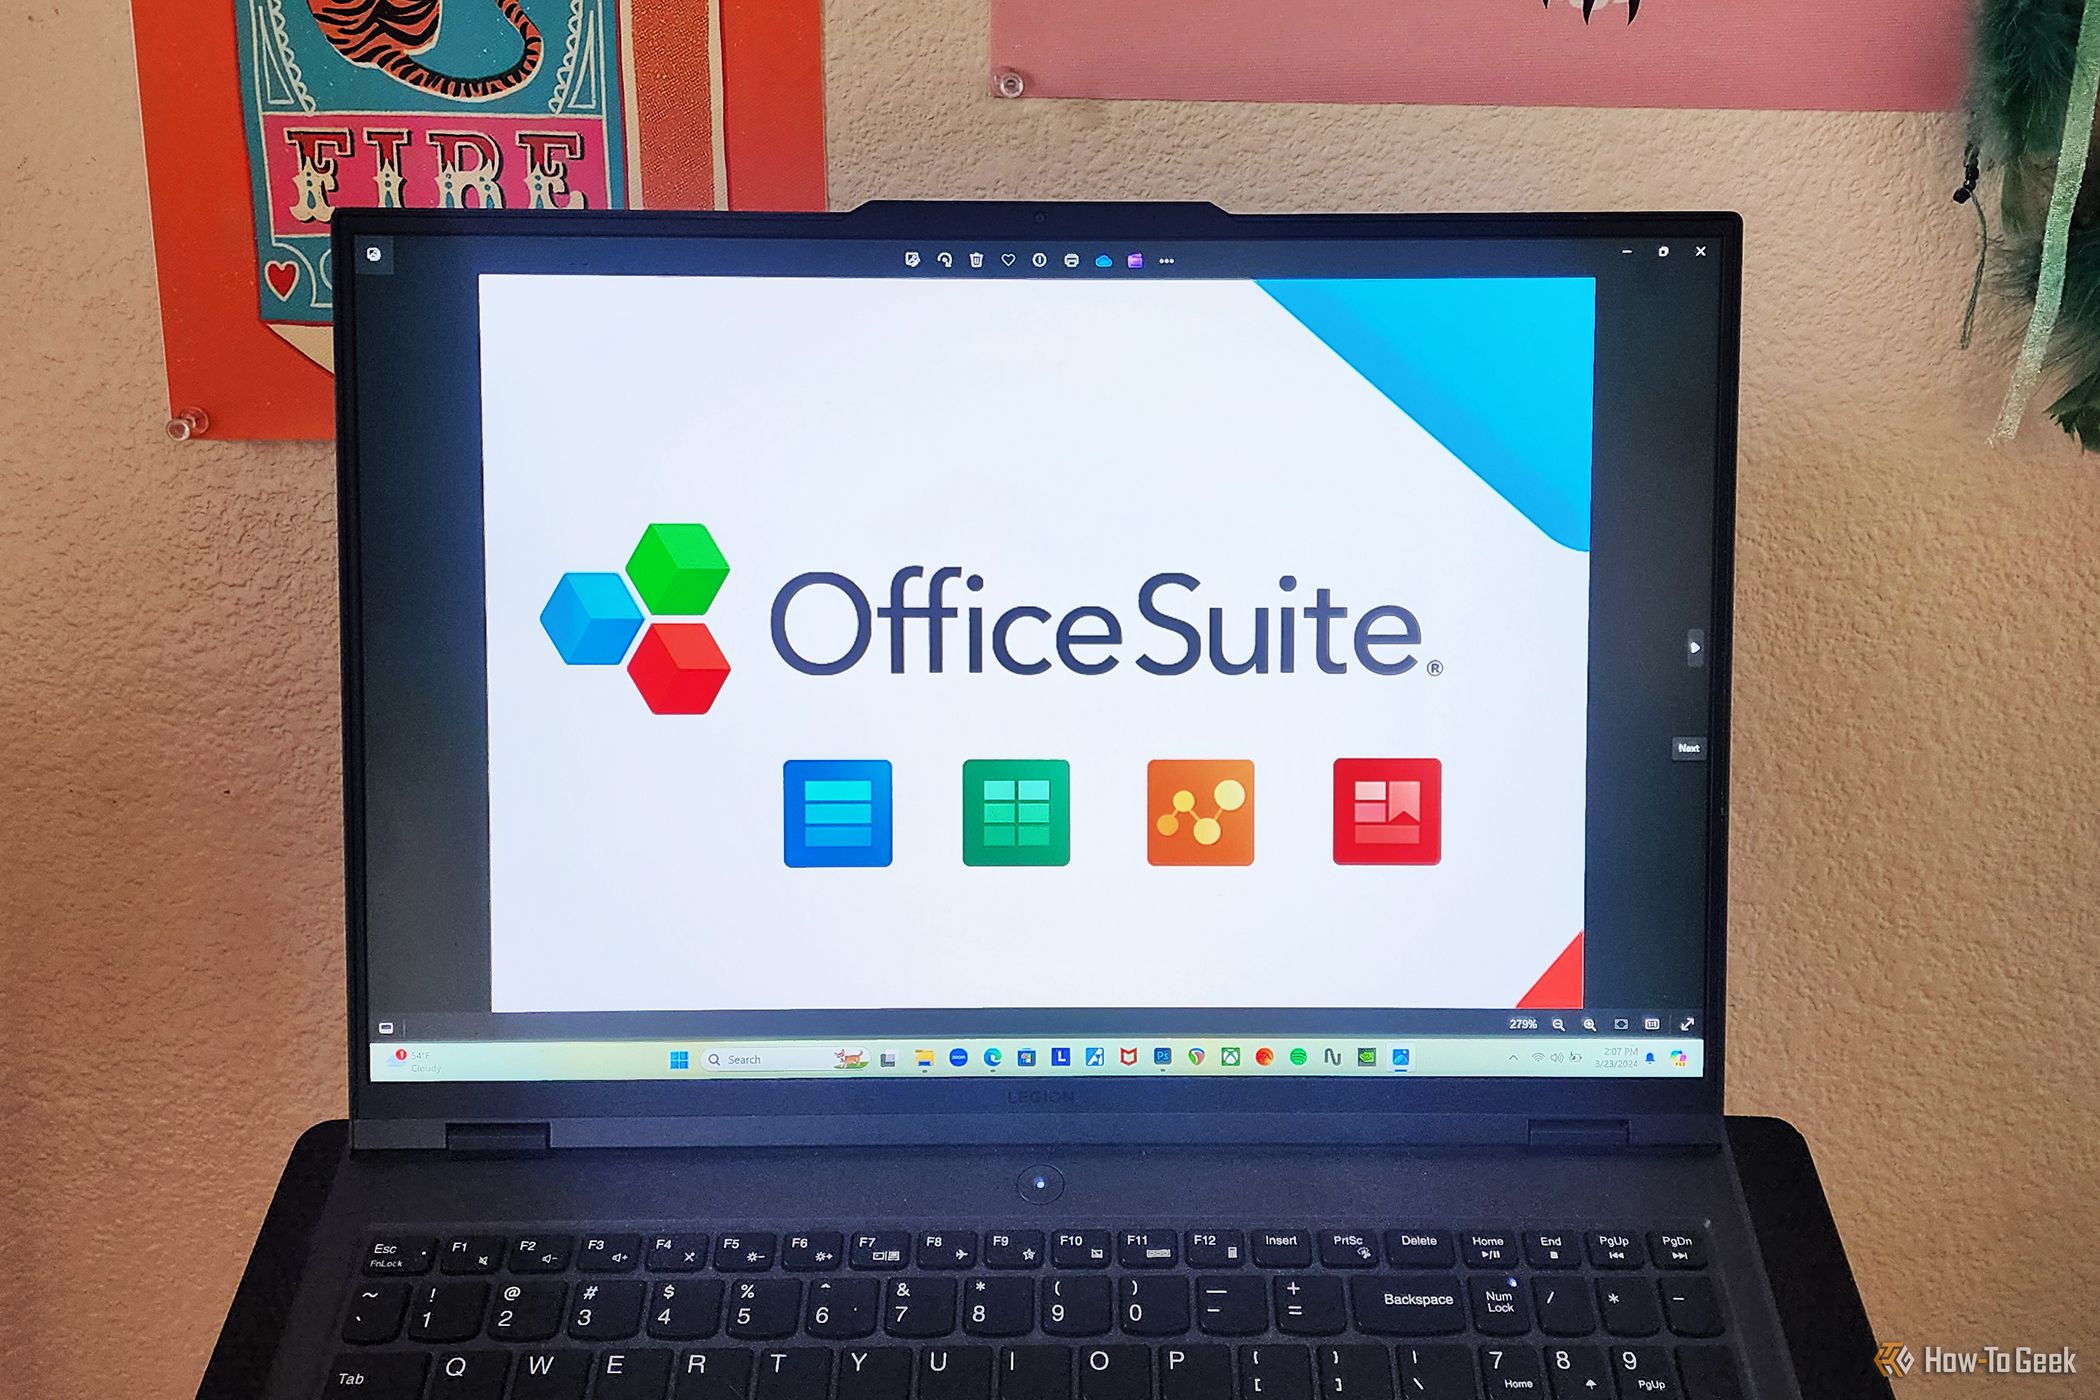 The OfficeSuite logo on a laptop.